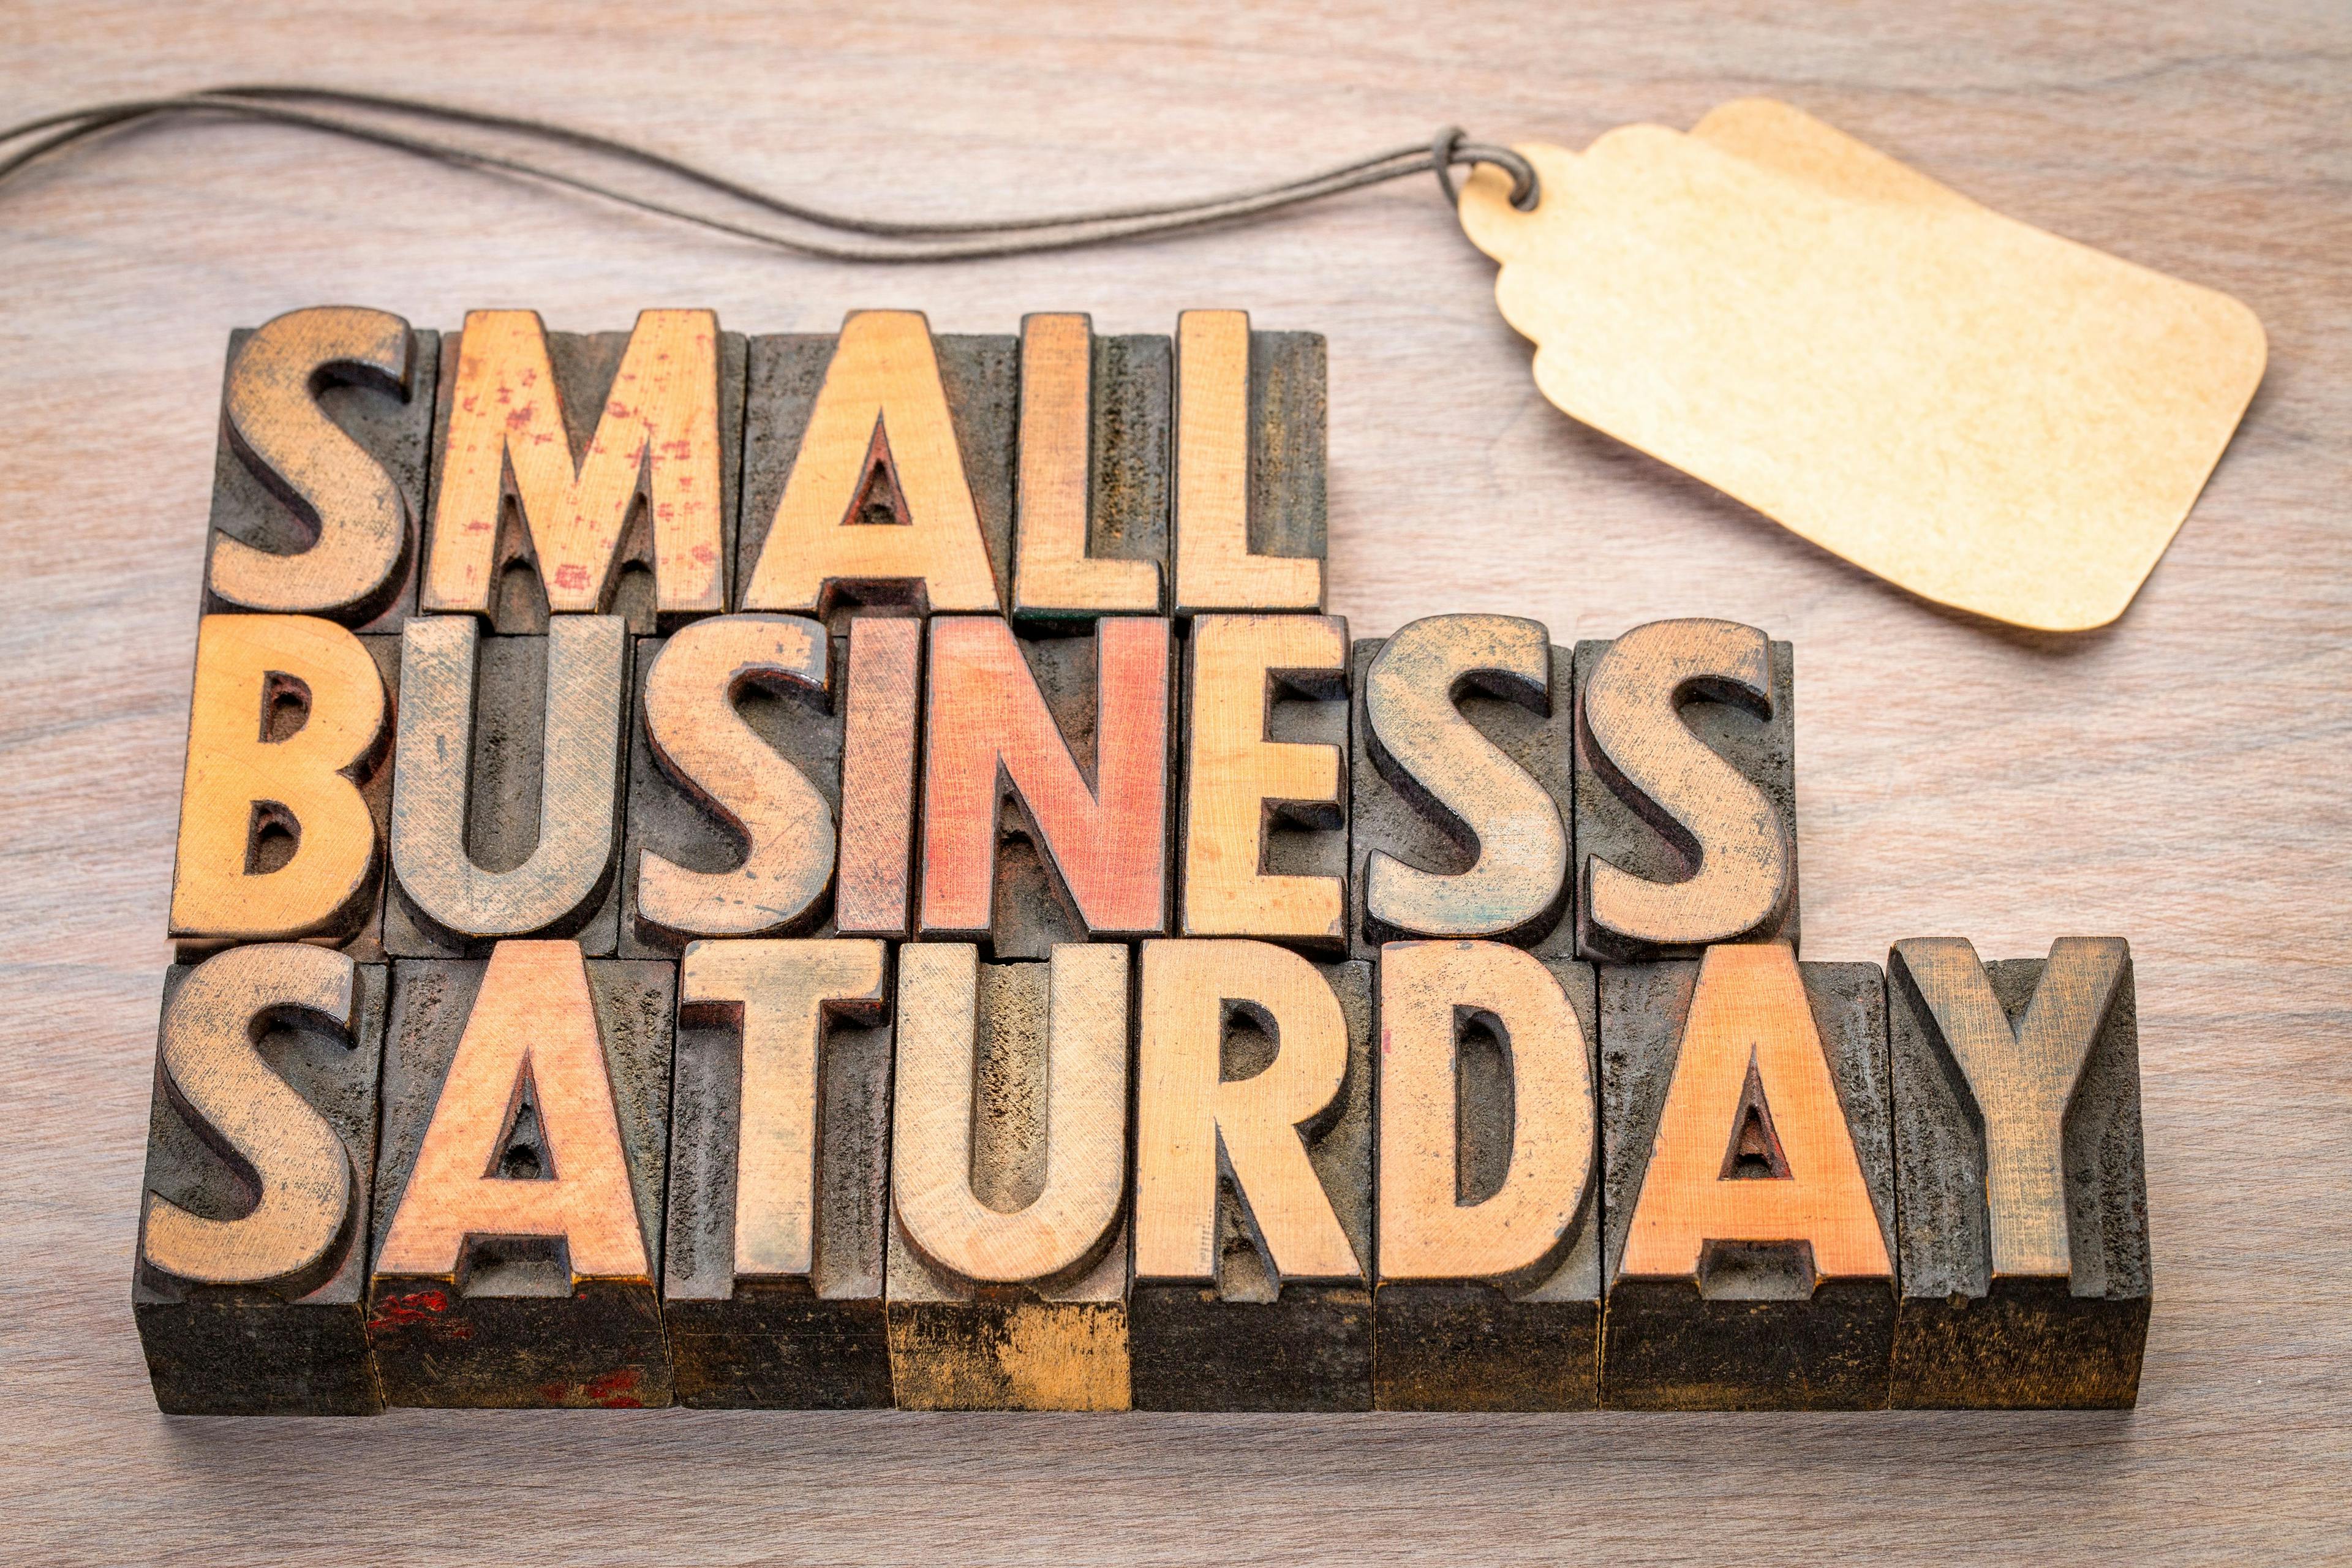 Leverage Small Business Saturday to Drive Sales, Build Partnerships